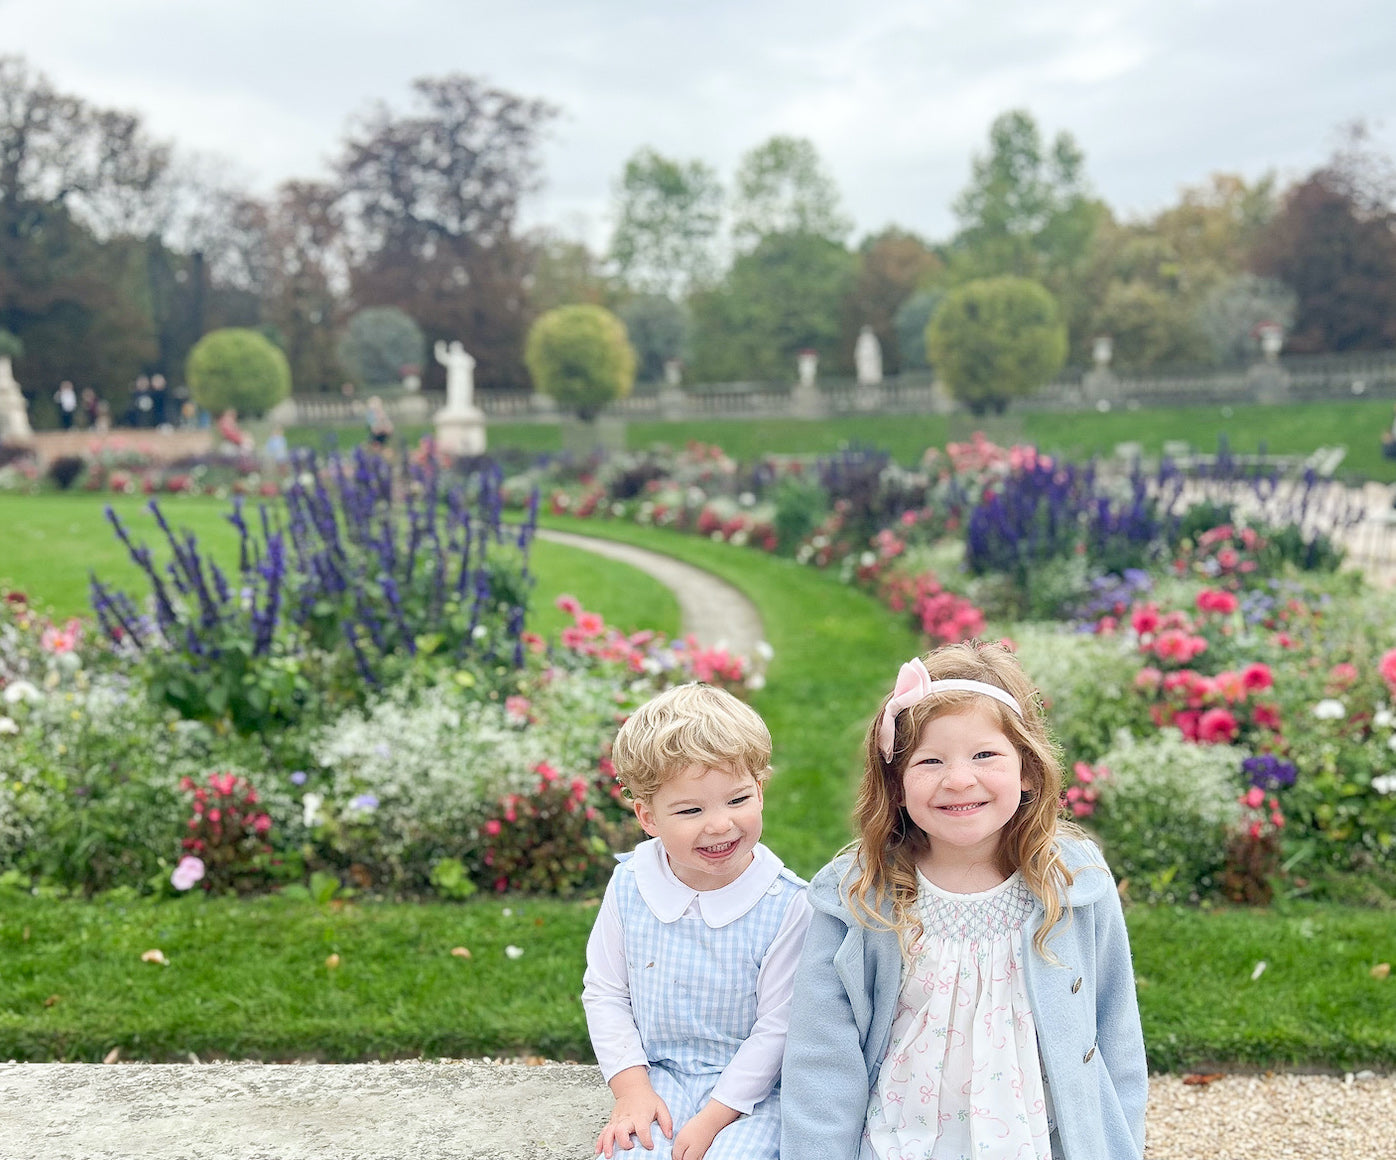 Travelling tips - Family journey to France - Paris with children what to visit and where to shop